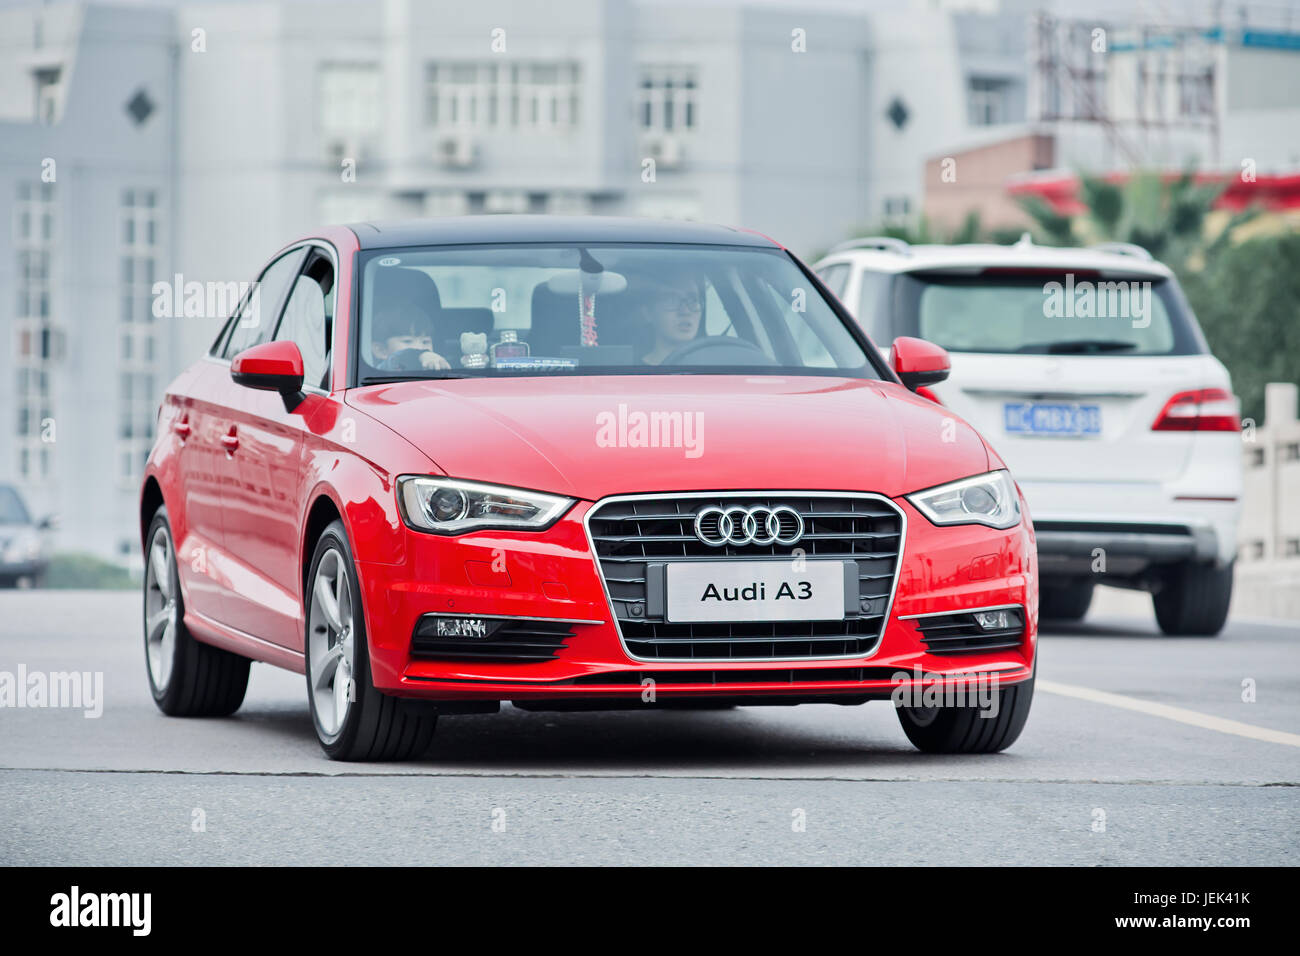 WENZHOU-CHINA-NOV. 17, 2014. New Audi A3 on the street. German Audi, BMW and Mercedes-Benz maintain a solid grip on China’s luxury car market. Stock Photo